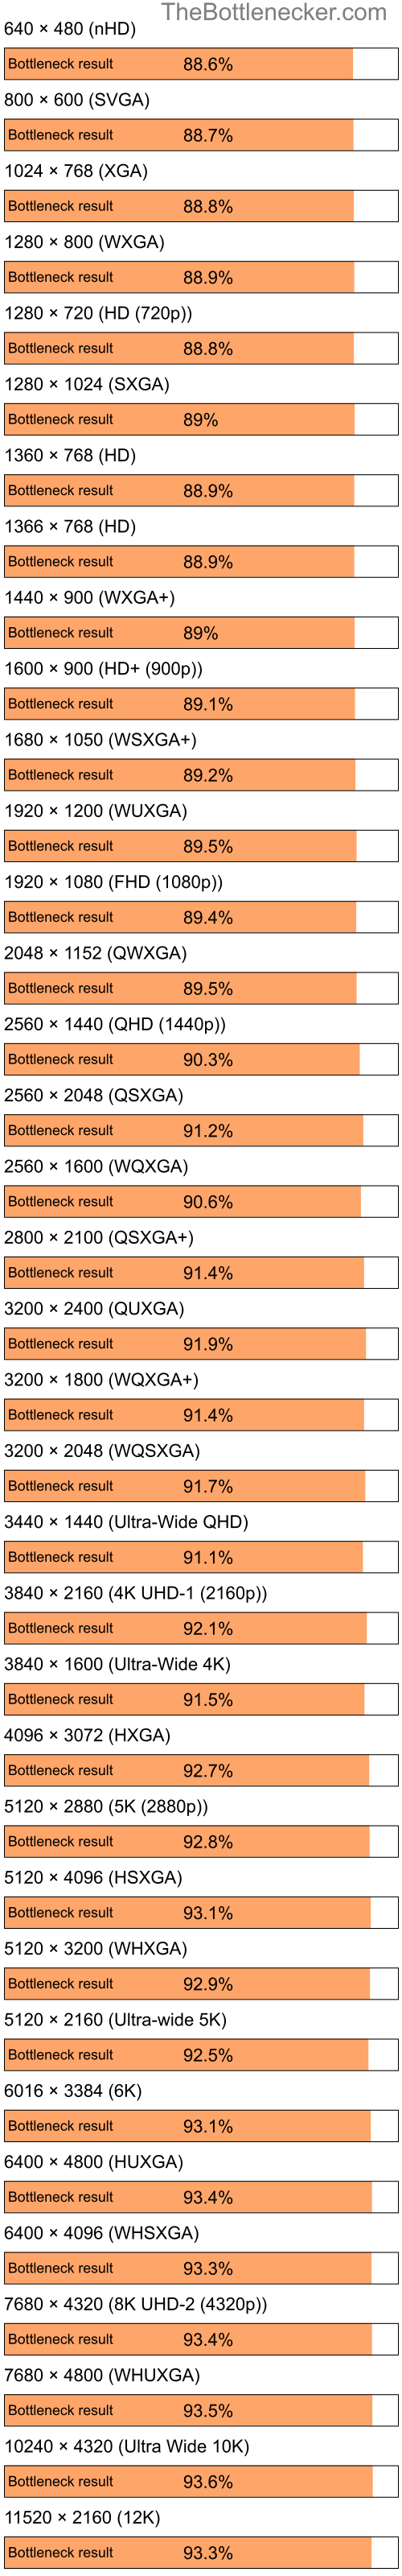 Bottleneck results by resolution for Intel Celeron M 410 and NVIDIA GeForce4 Ti 4600 in General Tasks